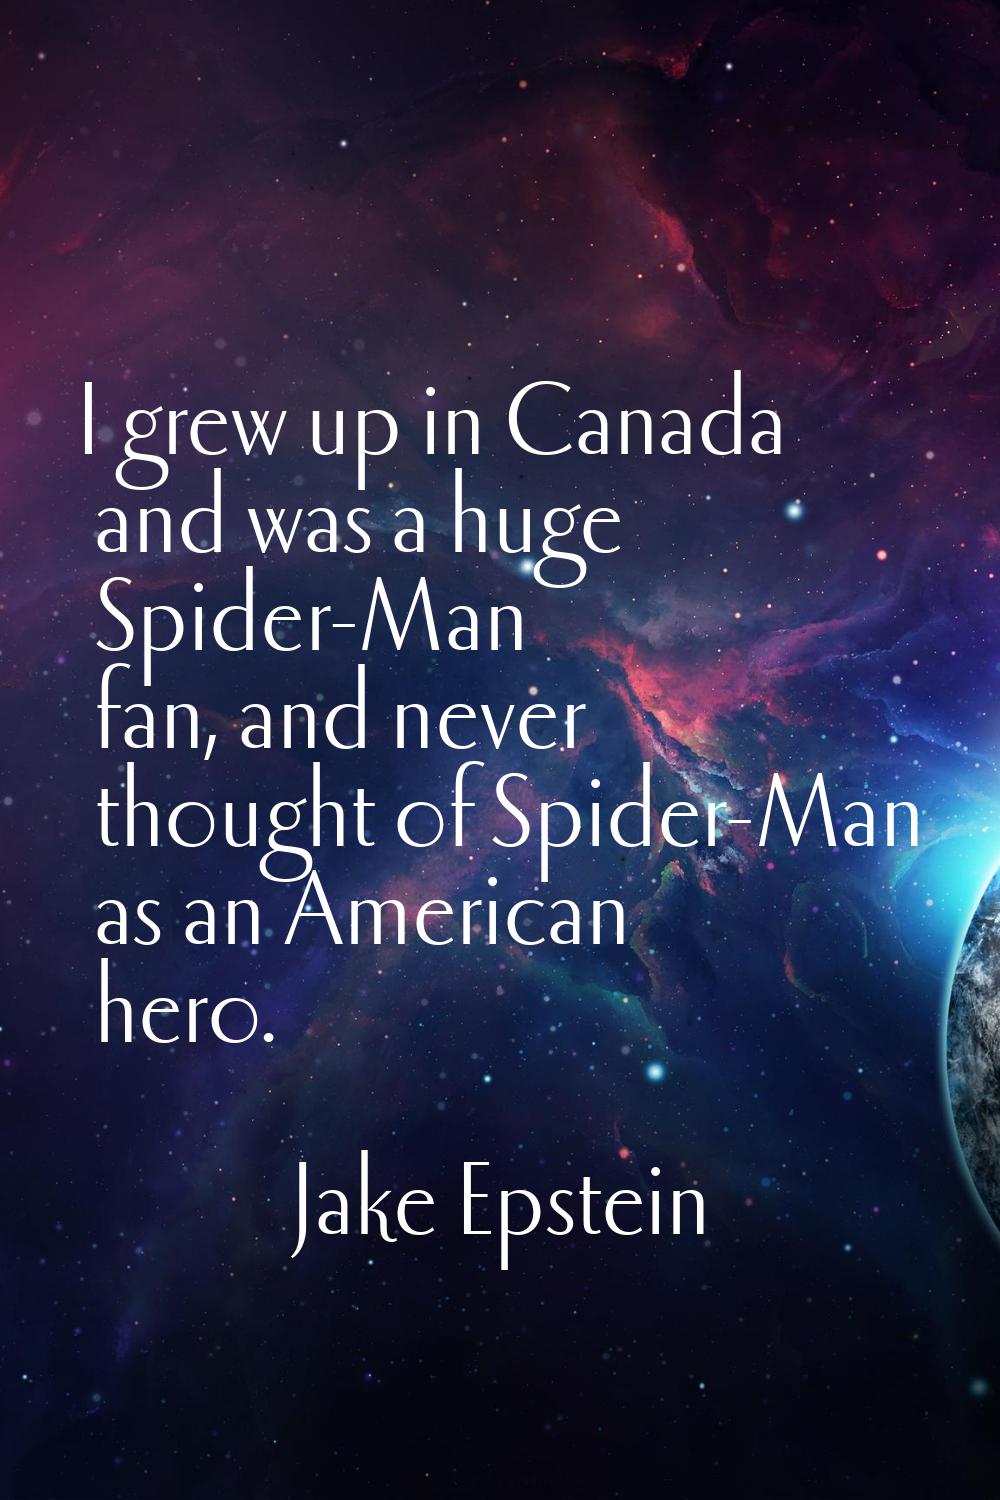 I grew up in Canada and was a huge Spider-Man fan, and never thought of Spider-Man as an American h